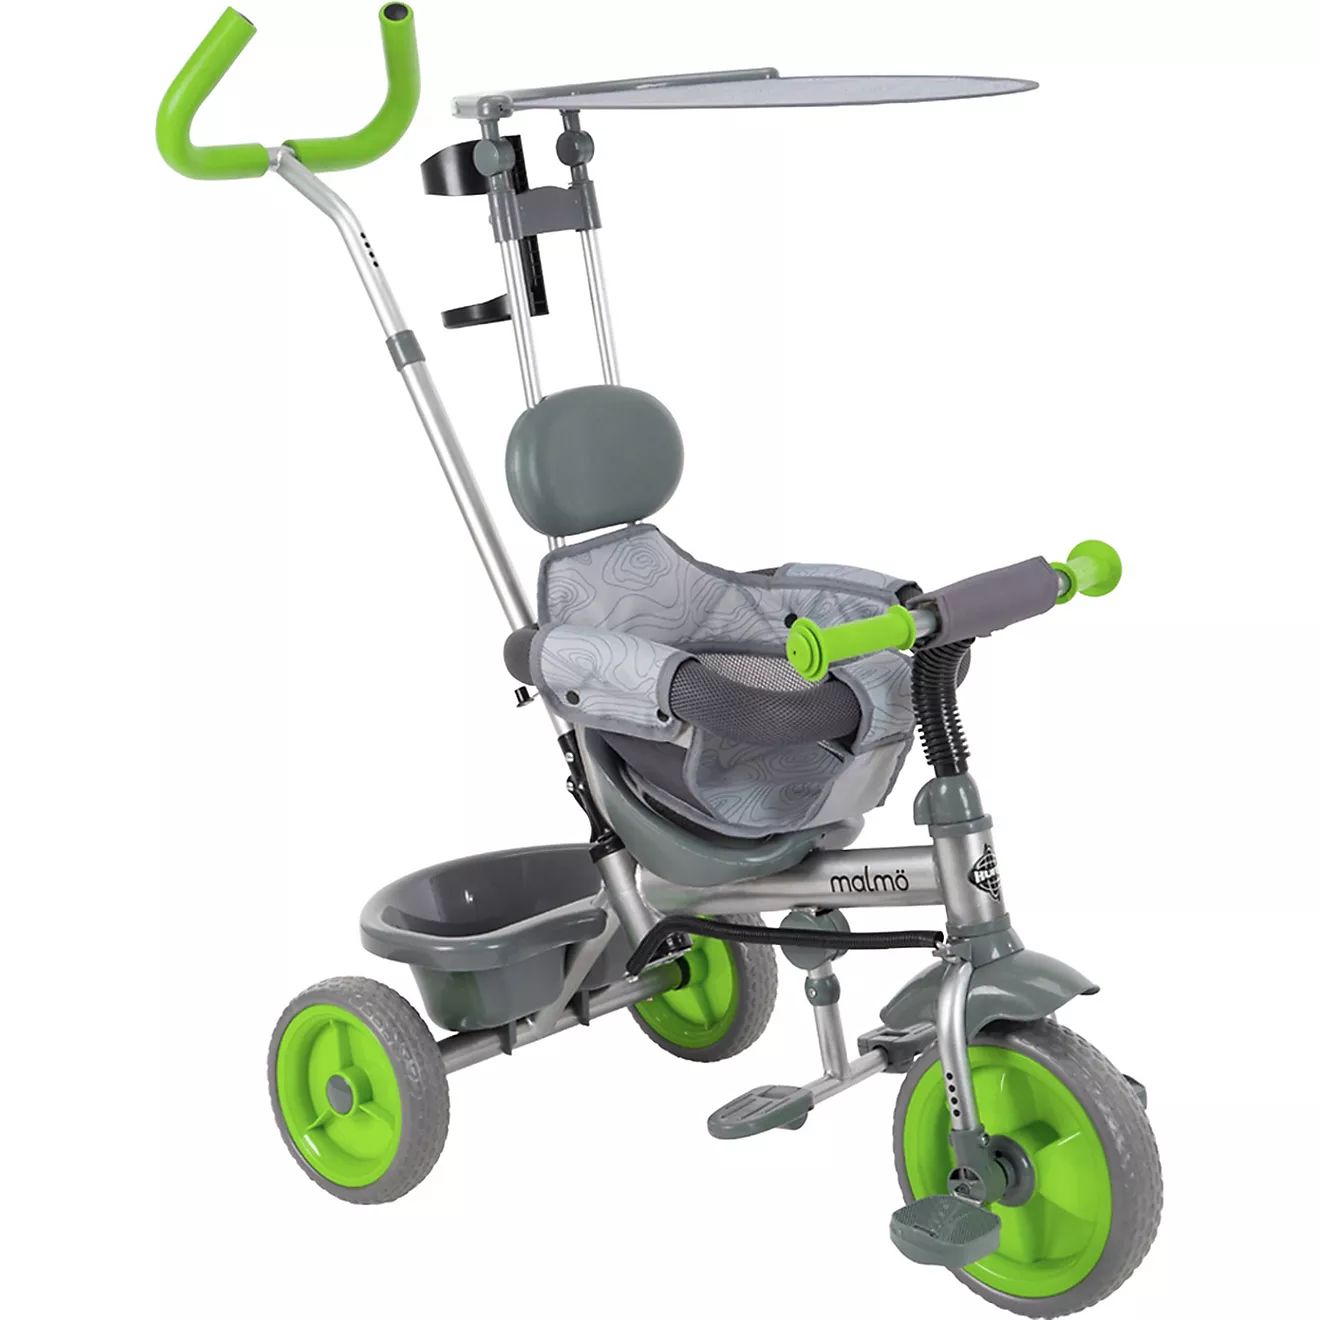 Huffy Malmo Conversion 3-in-1 Tricycle | Academy Sports + Outdoors